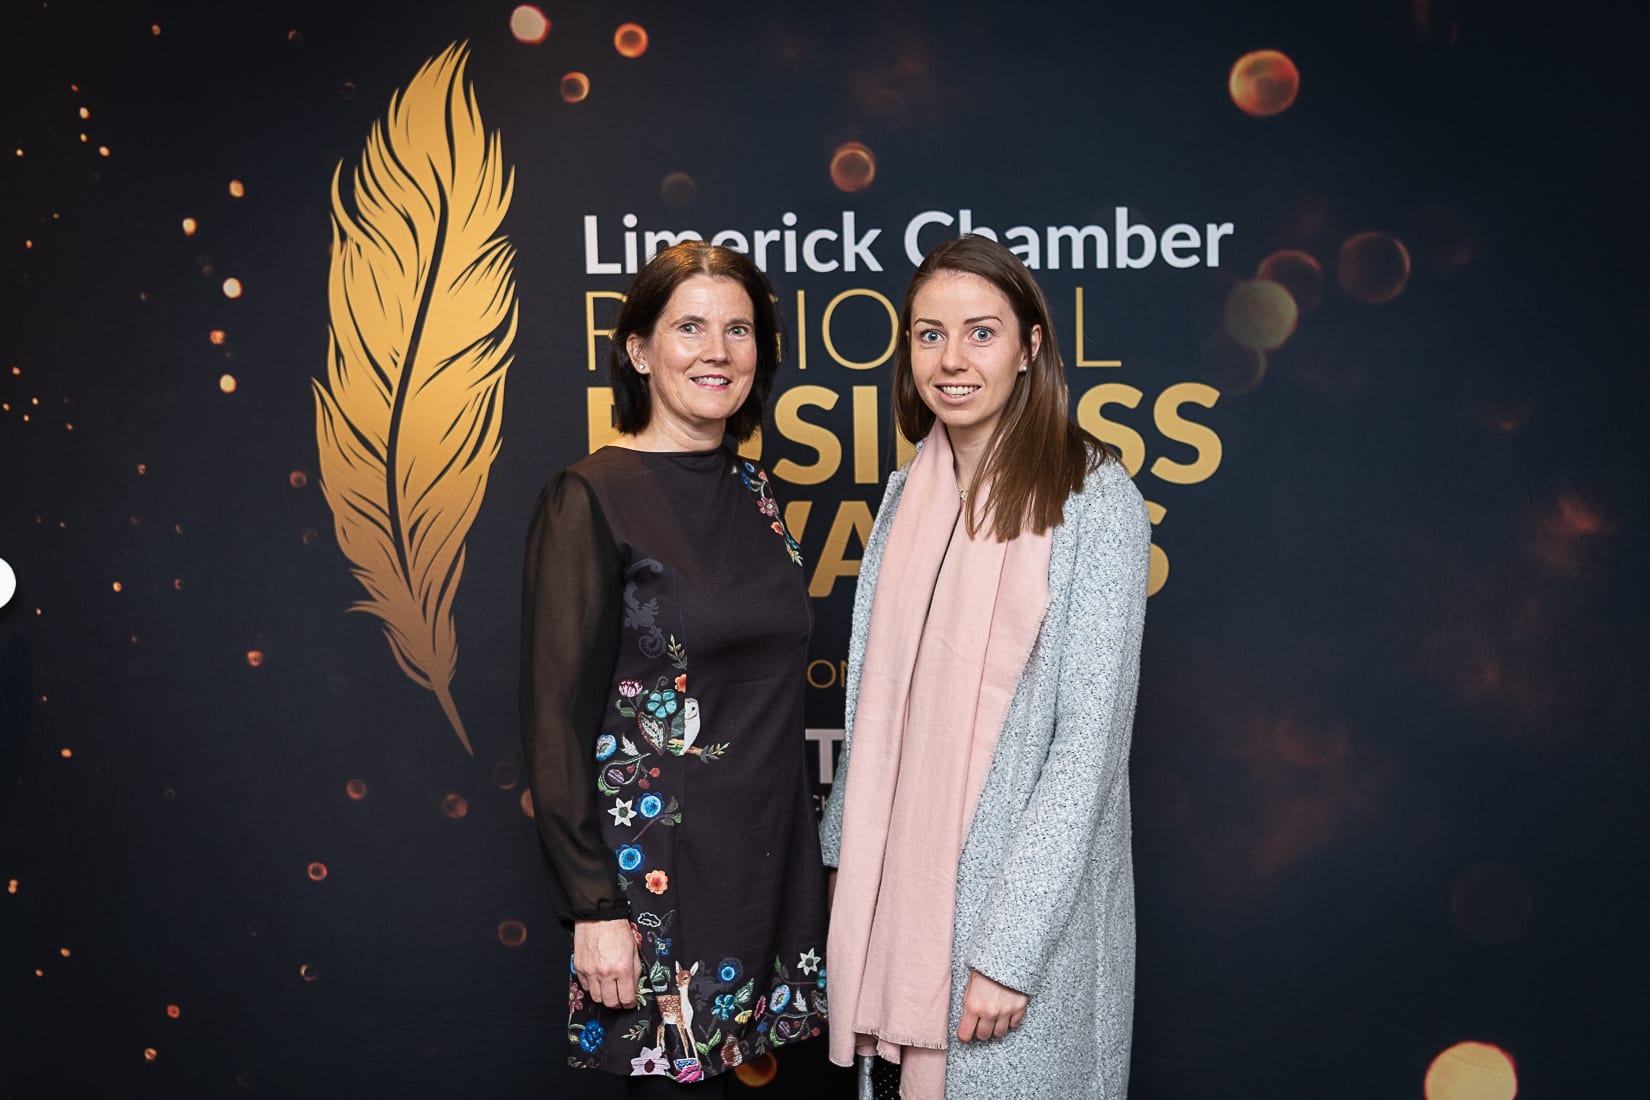 No repro fee-Limerick Chamber President Dinner Shortlist announcement which was held in The Limerick Strand Hotel on Wednesday 16th October  - From Left to Right: And Morris - Limerick Chamber Skillnet, Claire O’Flynn - Northern Trust
Photo credit Shauna Kennedy